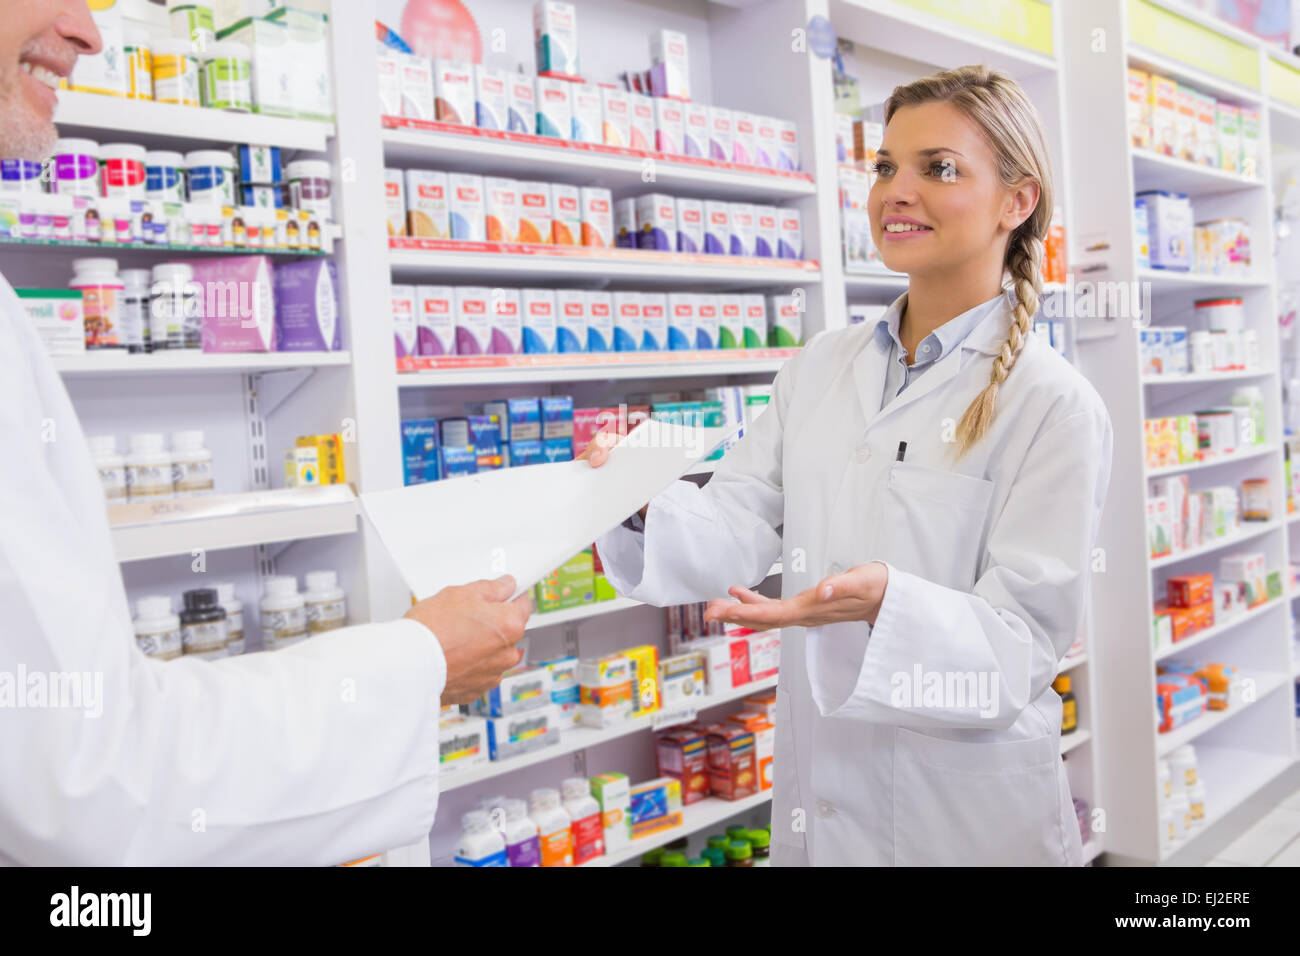 Pharmacist and trainee talking together about medication Stock Photo